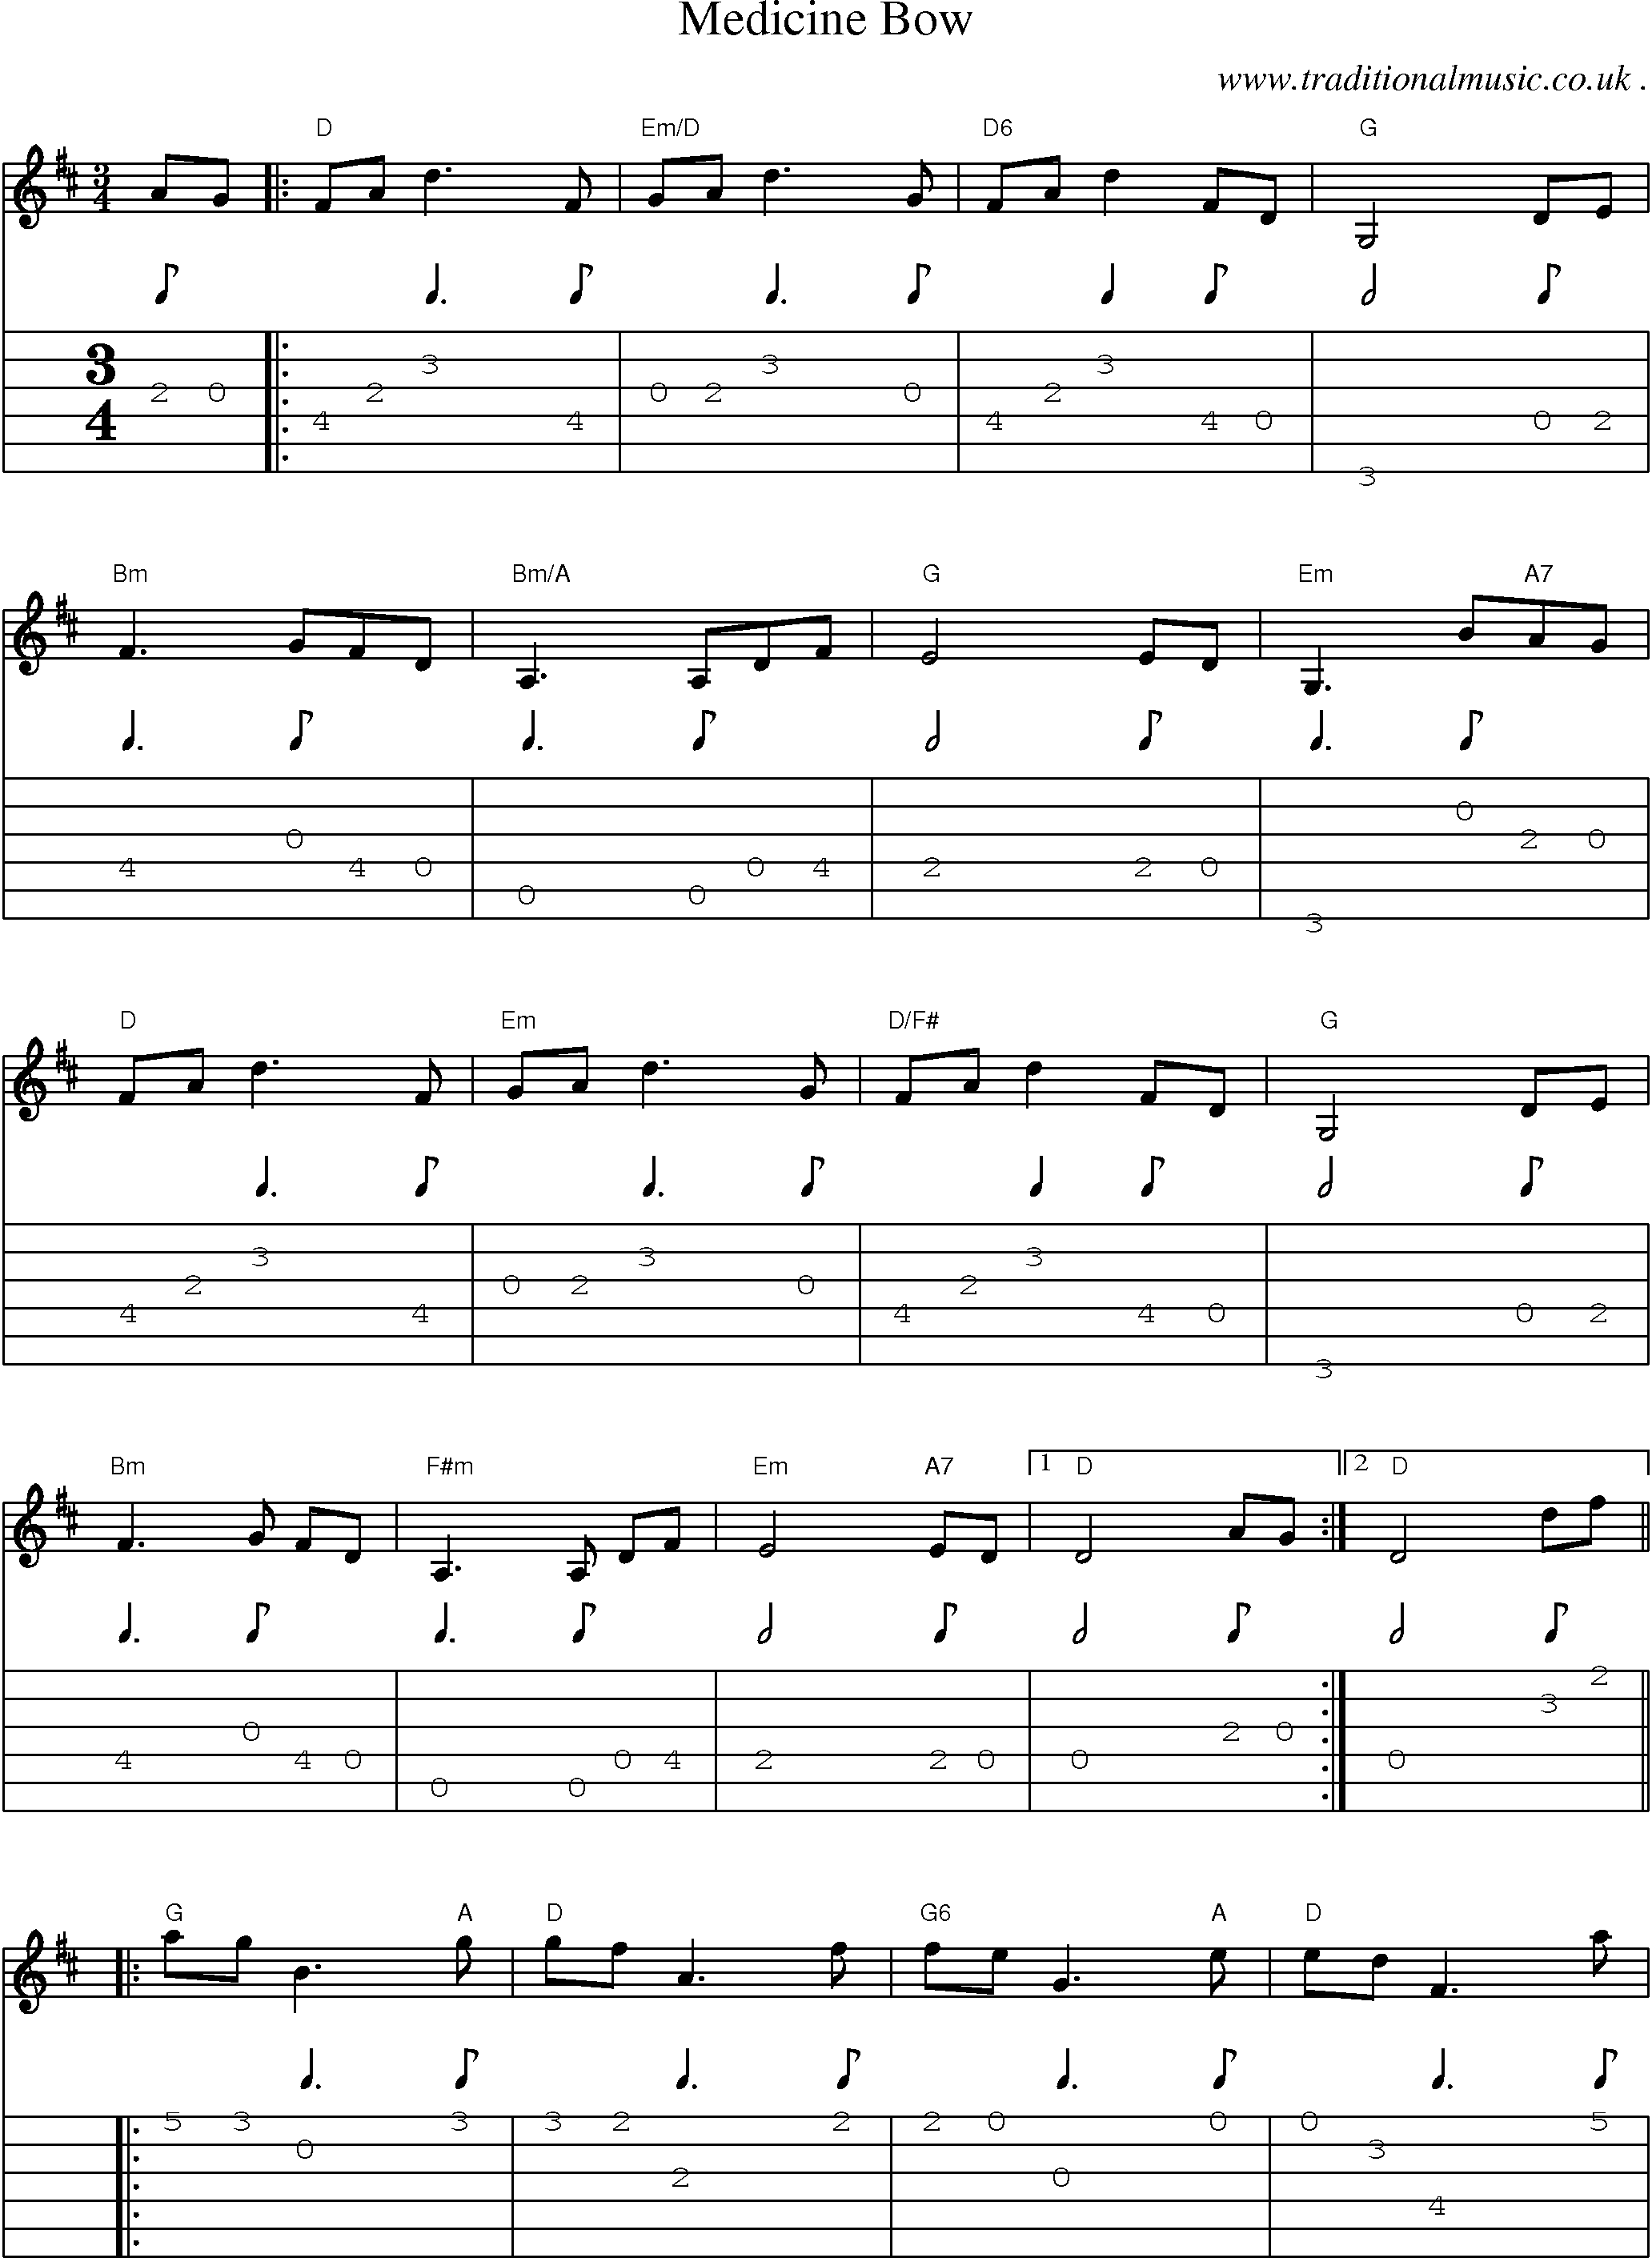 Music Score and Guitar Tabs for Medicine Bow